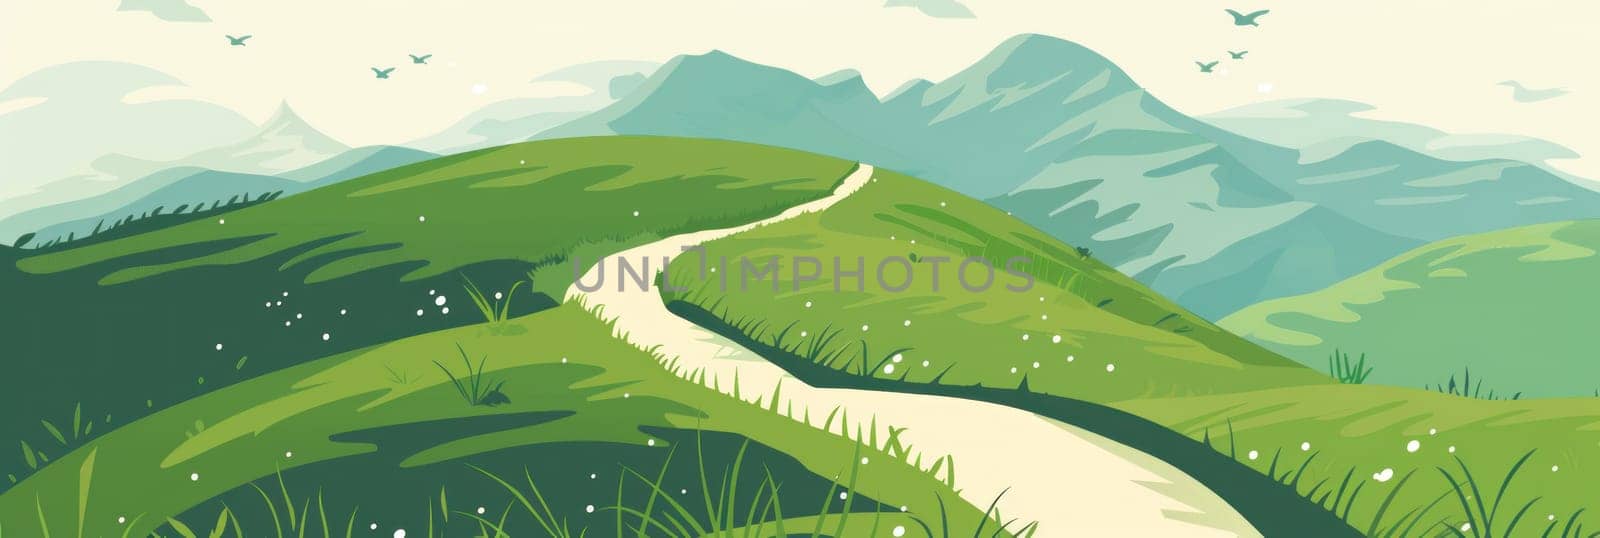 illustrator A mountain range with a sun in the sky by golfmerrymaker